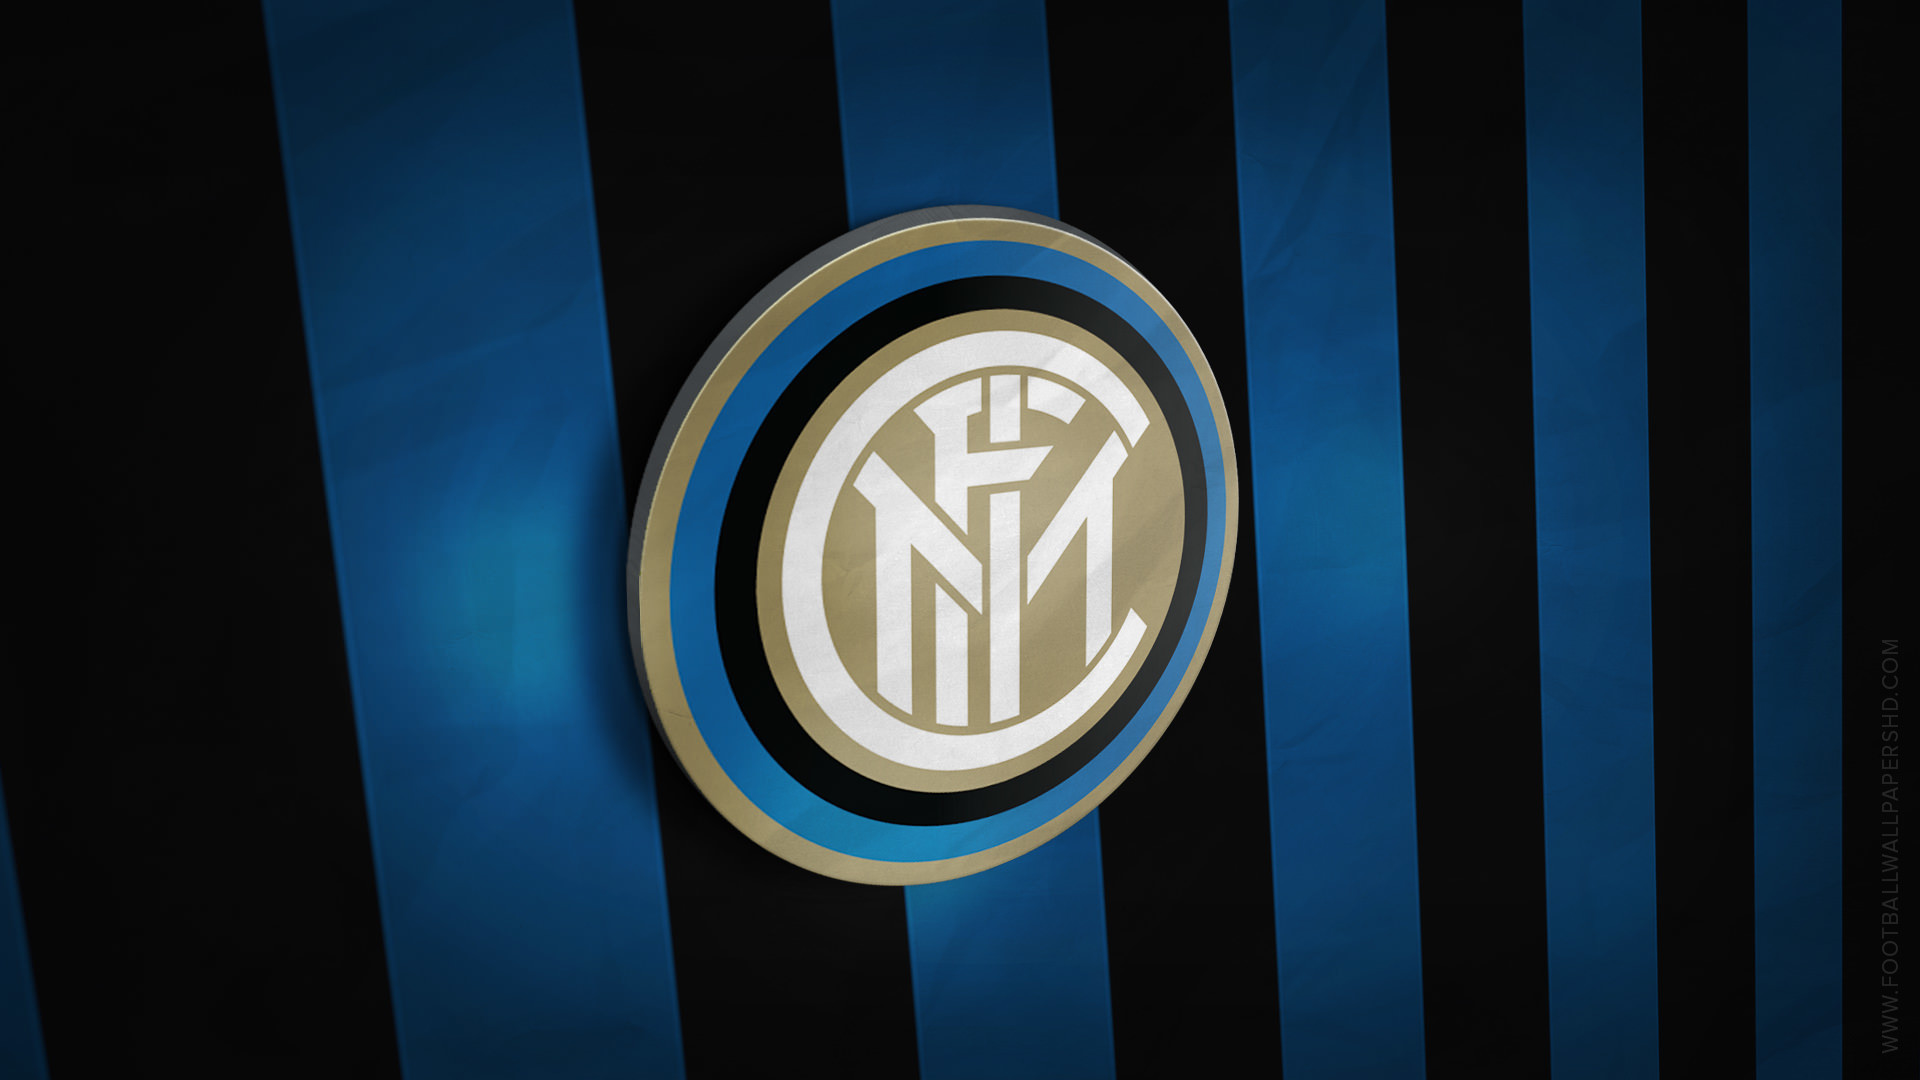 1920x1080  Search Results for “inter milan wallpaper – Adorable Wallpapers